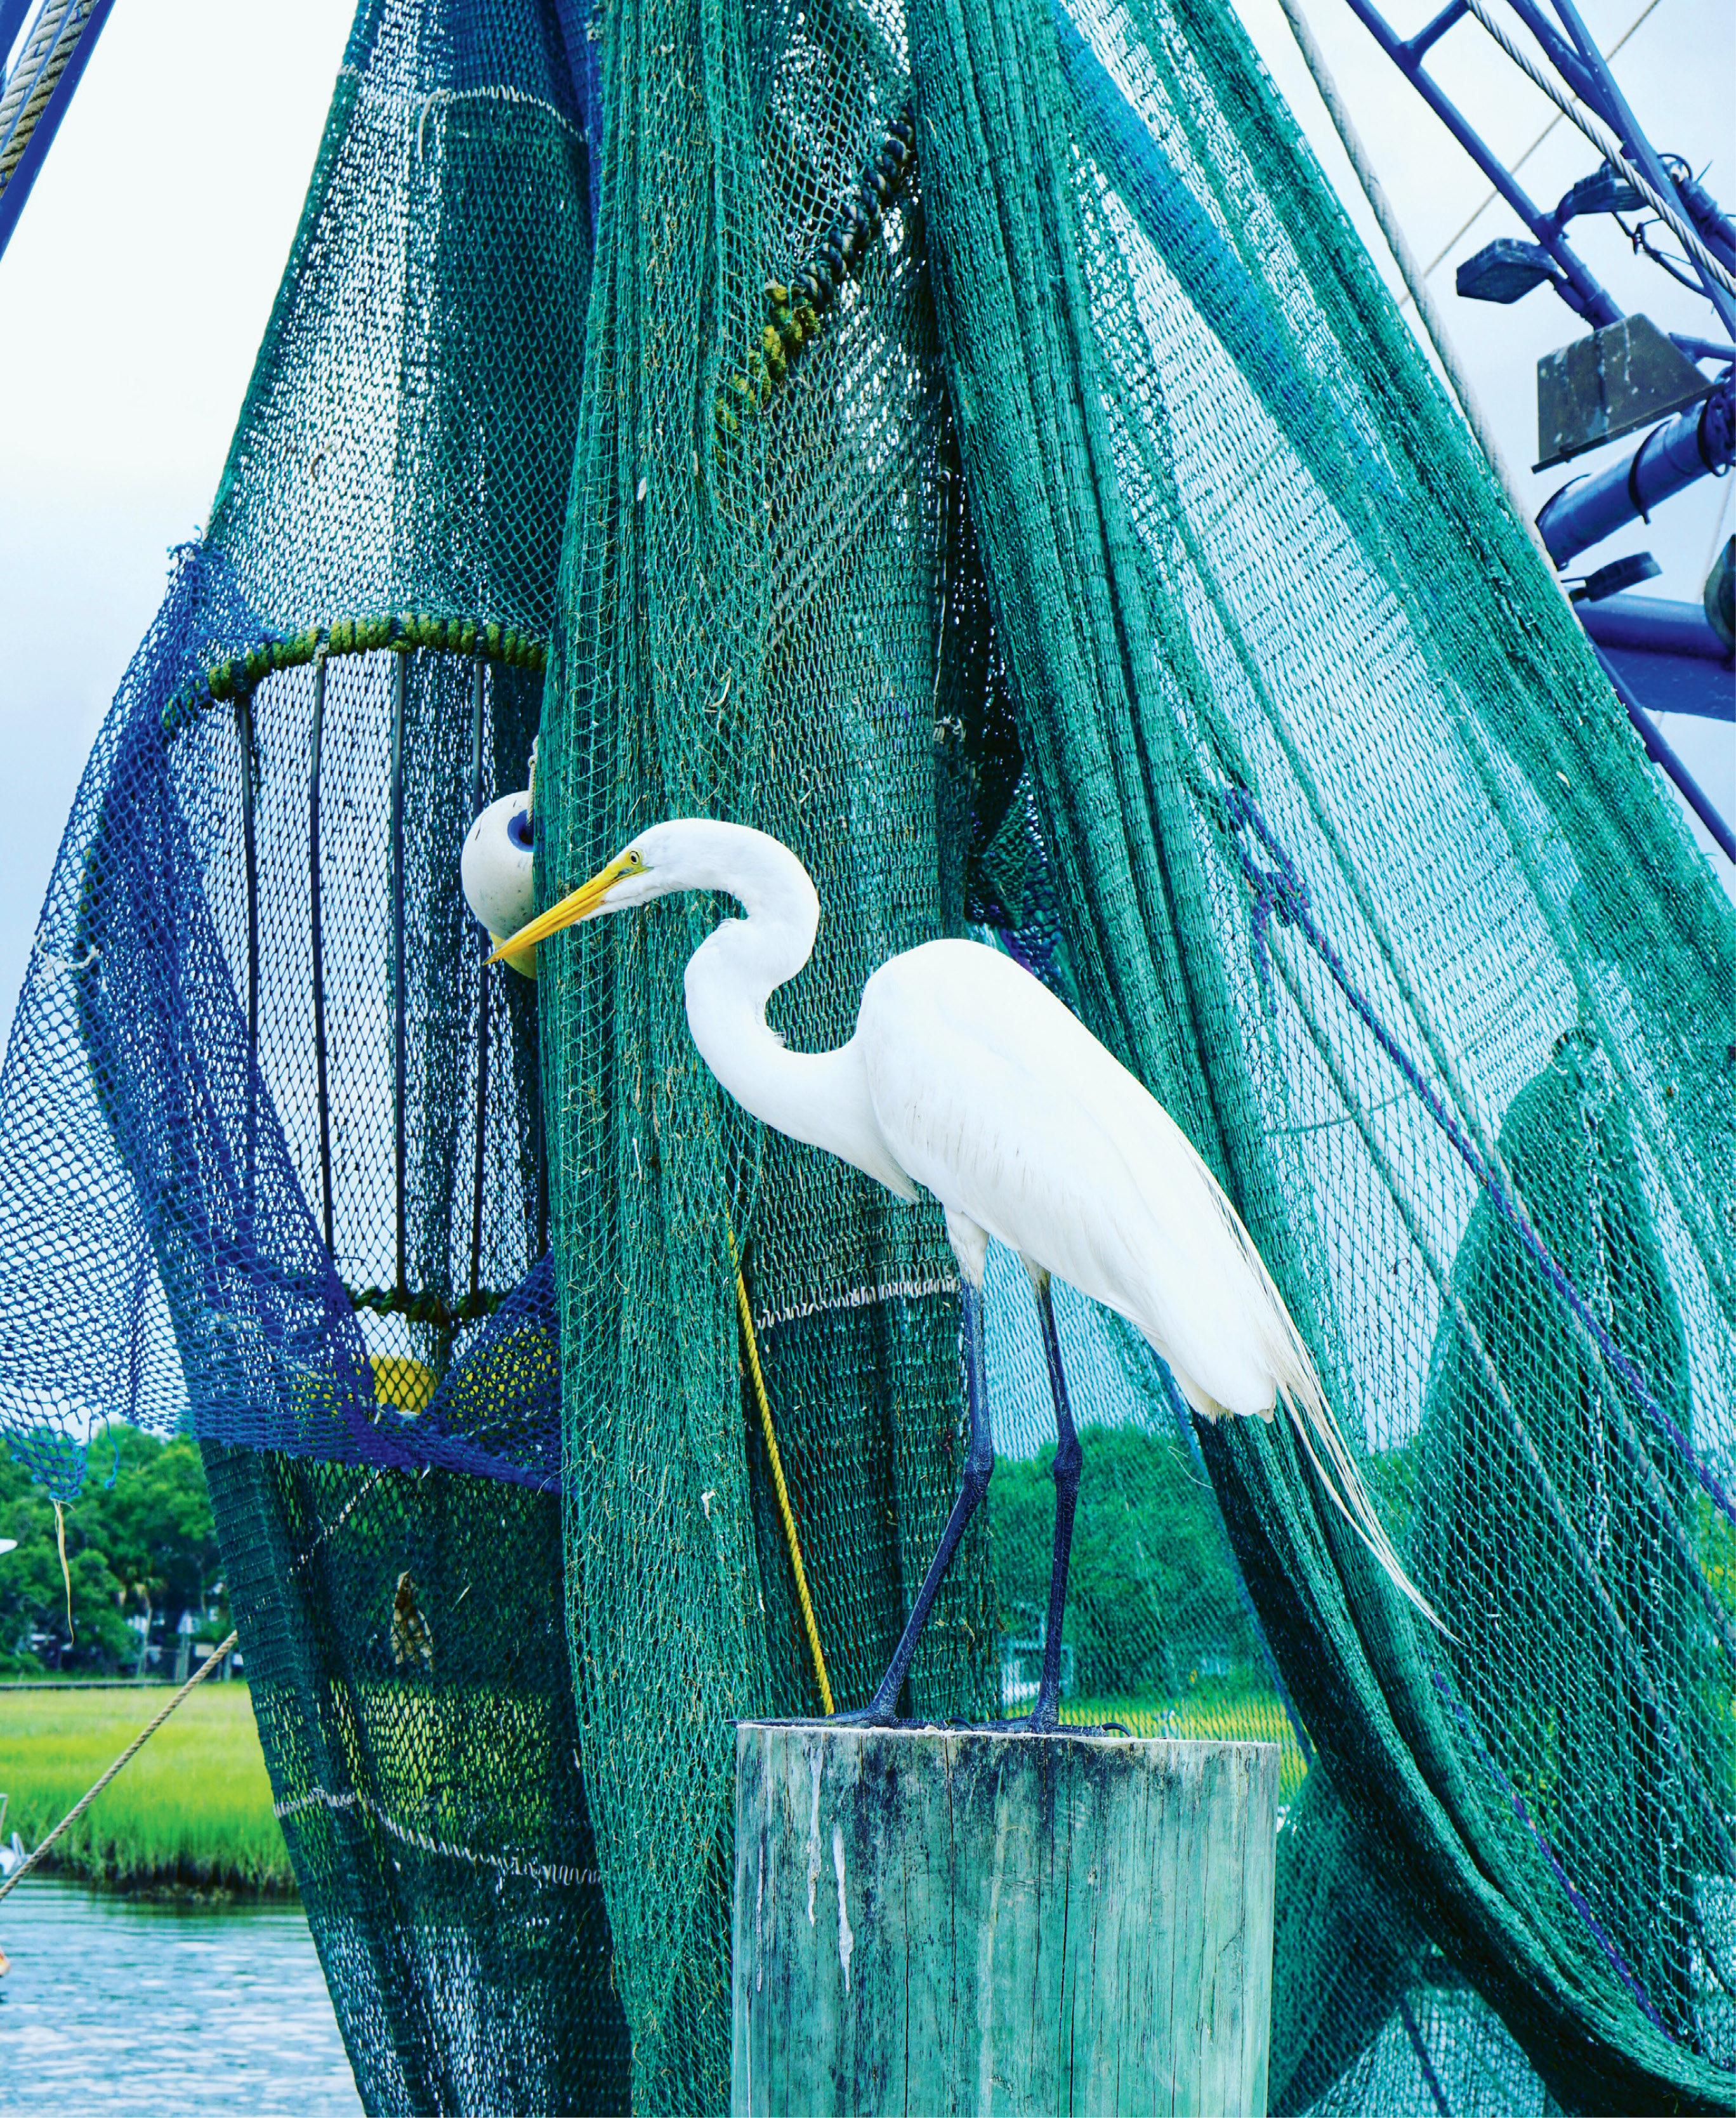 1st Place Amateur Category - Eyeing the Catch of the Day by Marnie Huger  {Amateur category}  - A great egret patiently awaits his next meal on a shrimp boat docked on Shem  Creek last summer.